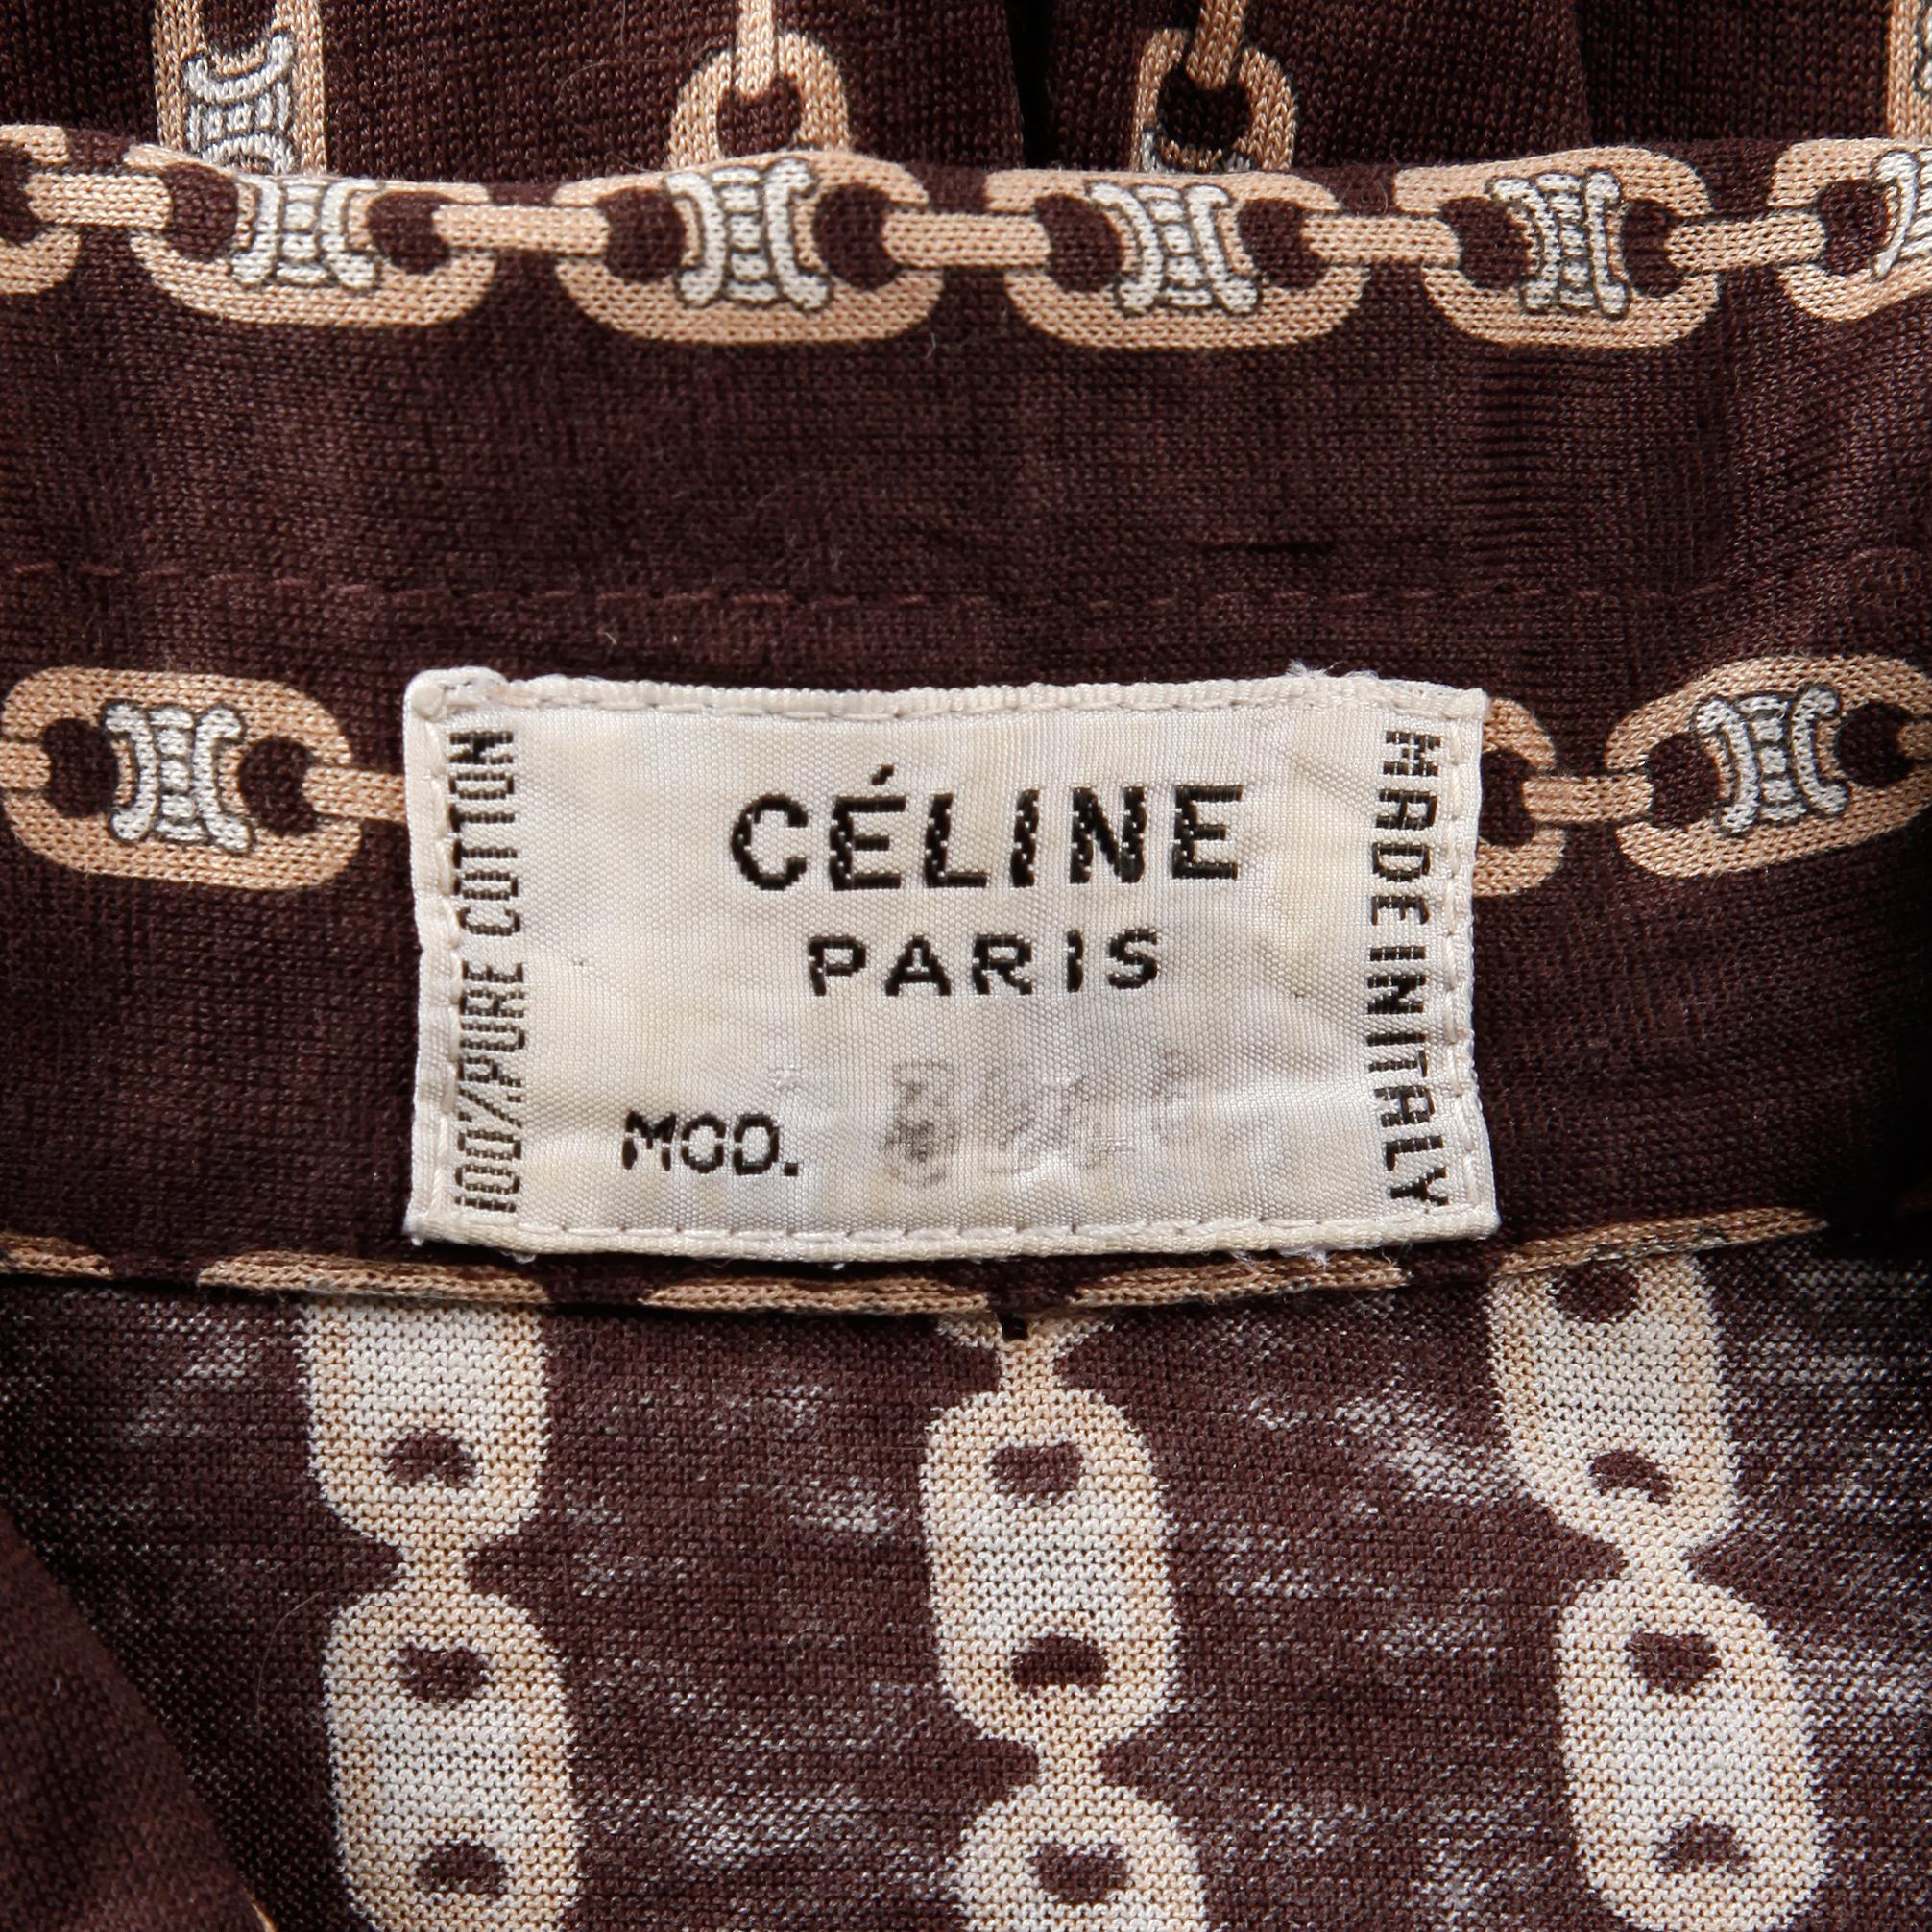 Fantastic vintage 1970s blouse by Celine Paris with iconic equestrian horse bit and monogram print. Numbered label. Unlined with front button closure and button closure at wrists. The marked size is 38, but the blouse fits like a modern size XS-S.